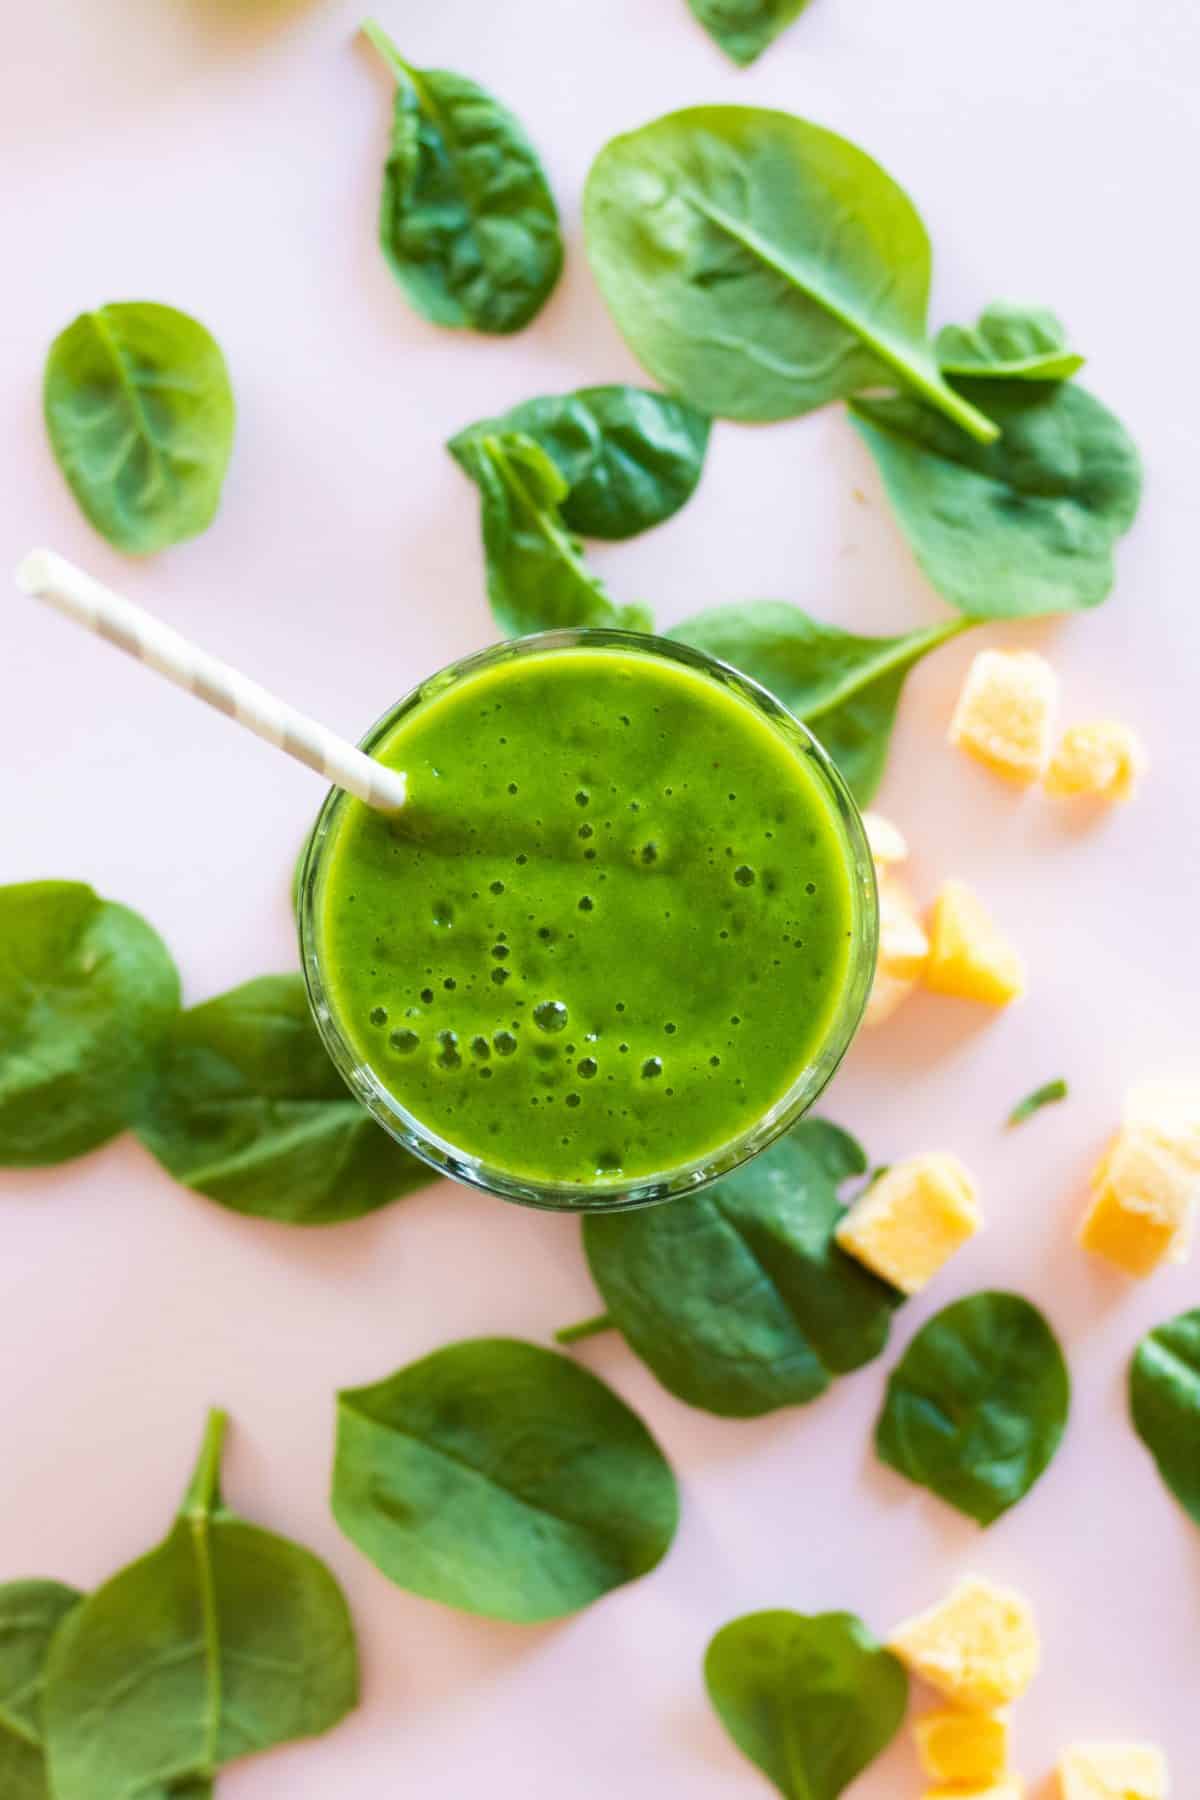 top view of green smoothie in a glass with a straw with mango pieces and spinach leaves around.